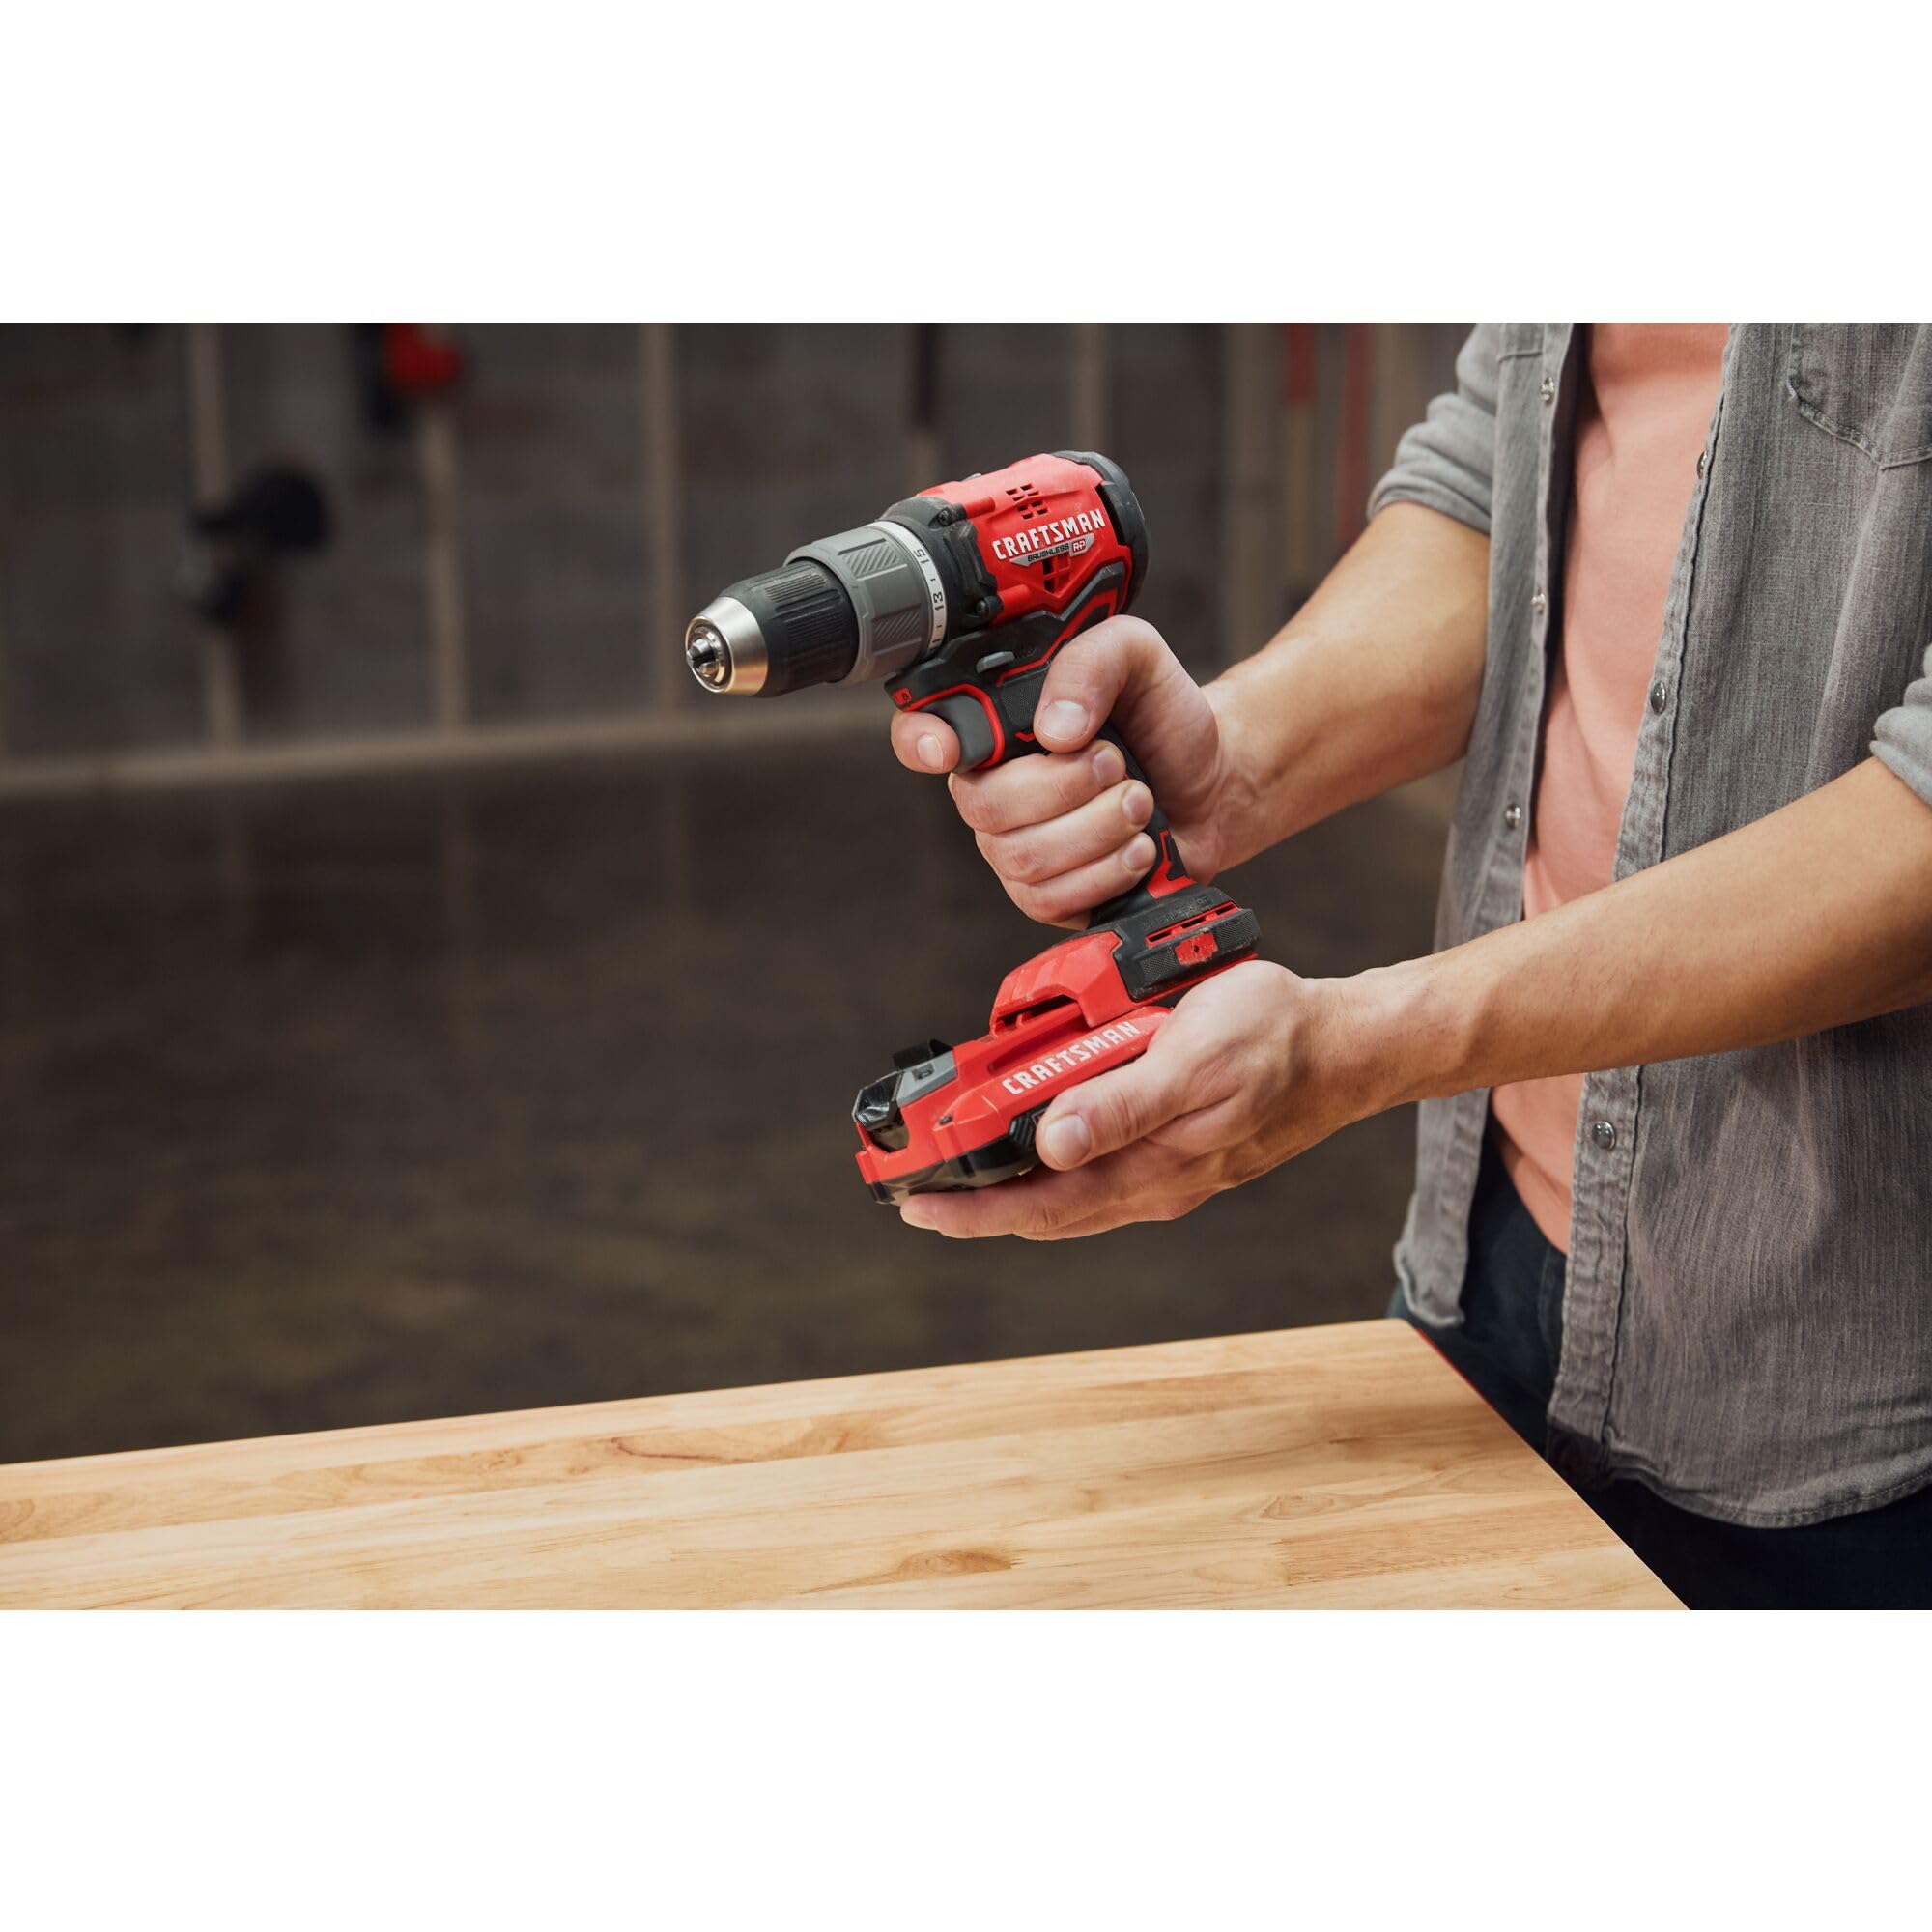 CRAFTSMAN RP+ Cordless Drill/Driver Kit, with 2 Batteries and Charger, Brushless (CMCD713C2)